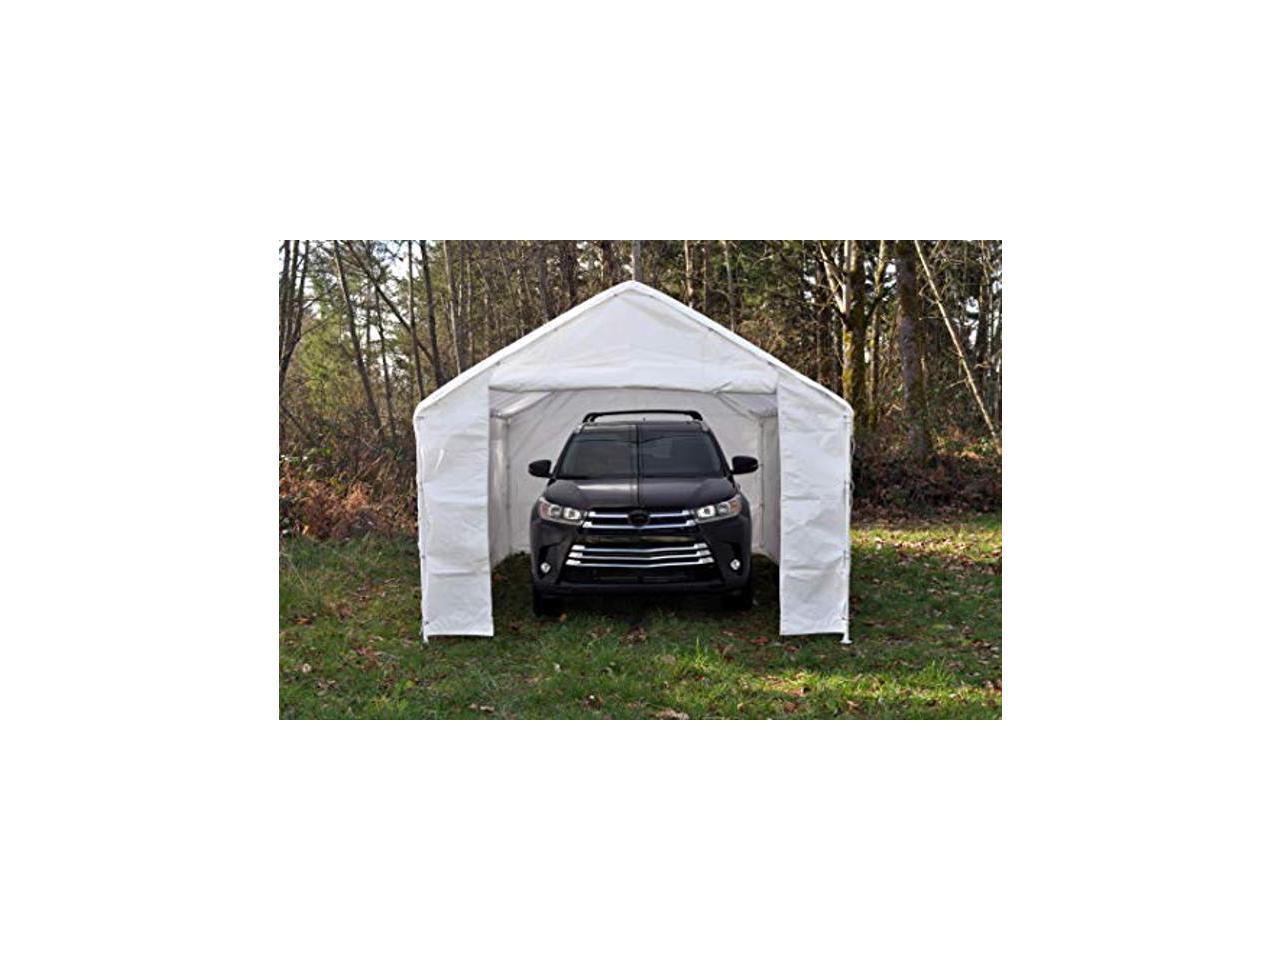 DRY TOP 73002 Canopy Enclosure Kit White